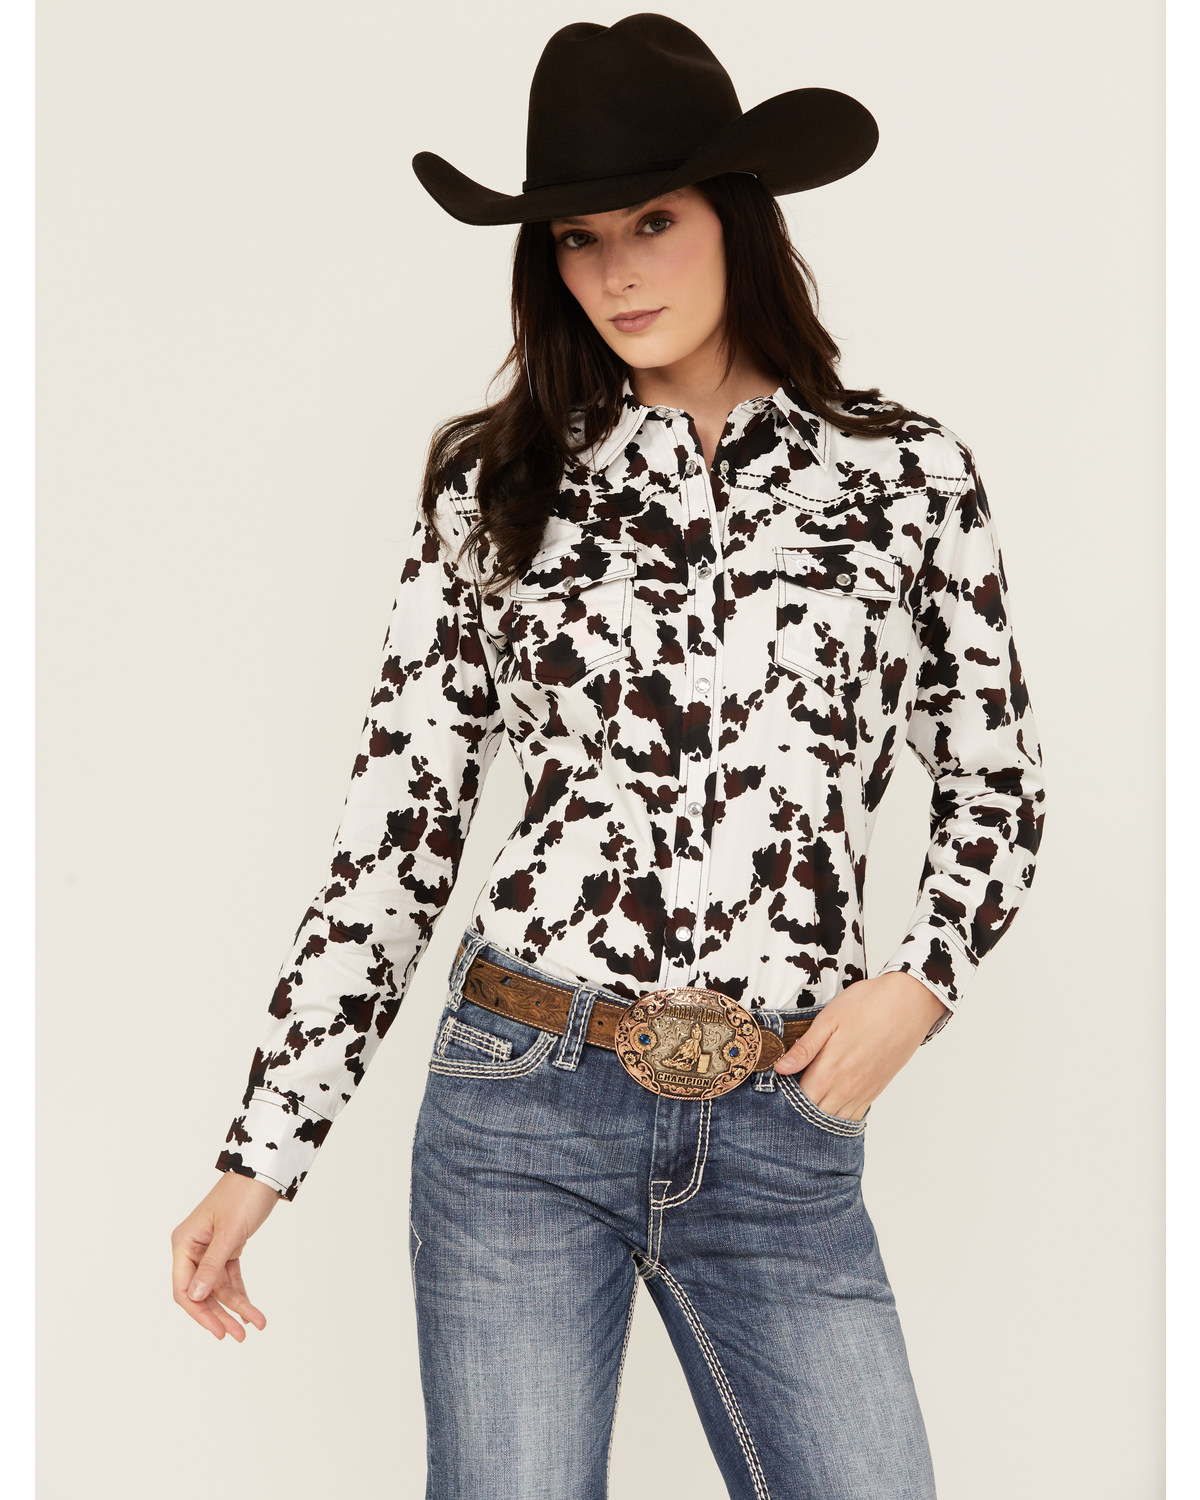 Cowgirl Hardware Women's Cow Print Snap Long Sleeve Western Shirt